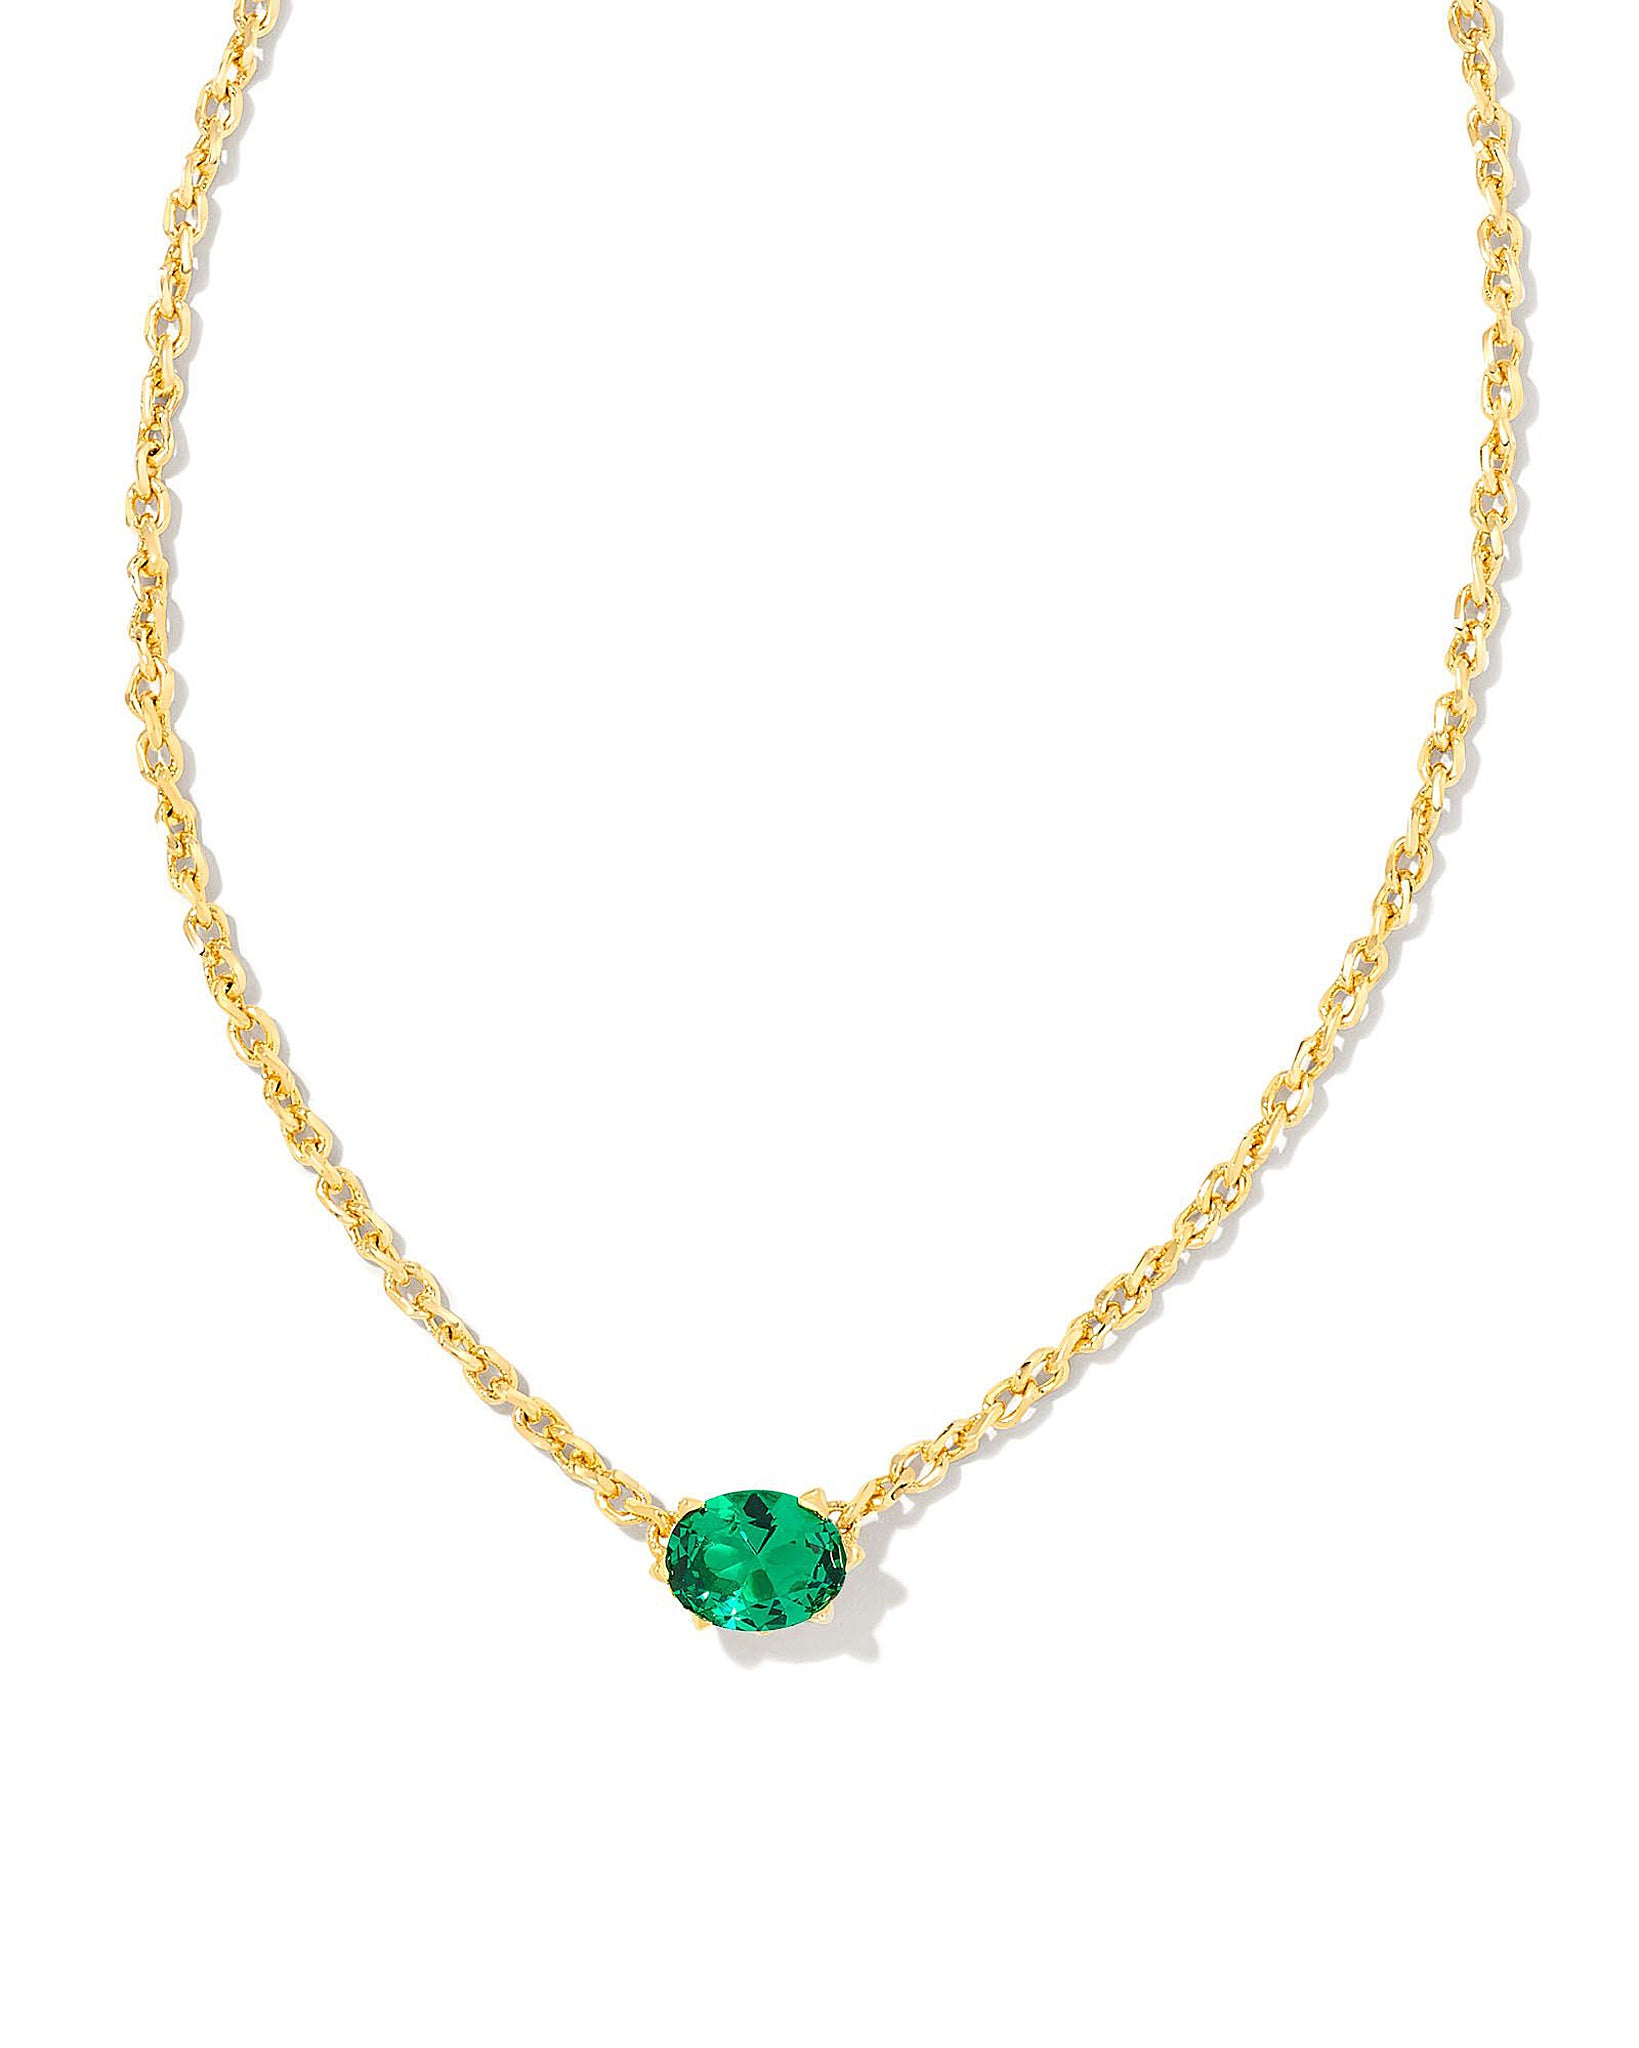 Kendra Scott Cailin Oval Pendant Necklace in Green Crystal and Gold